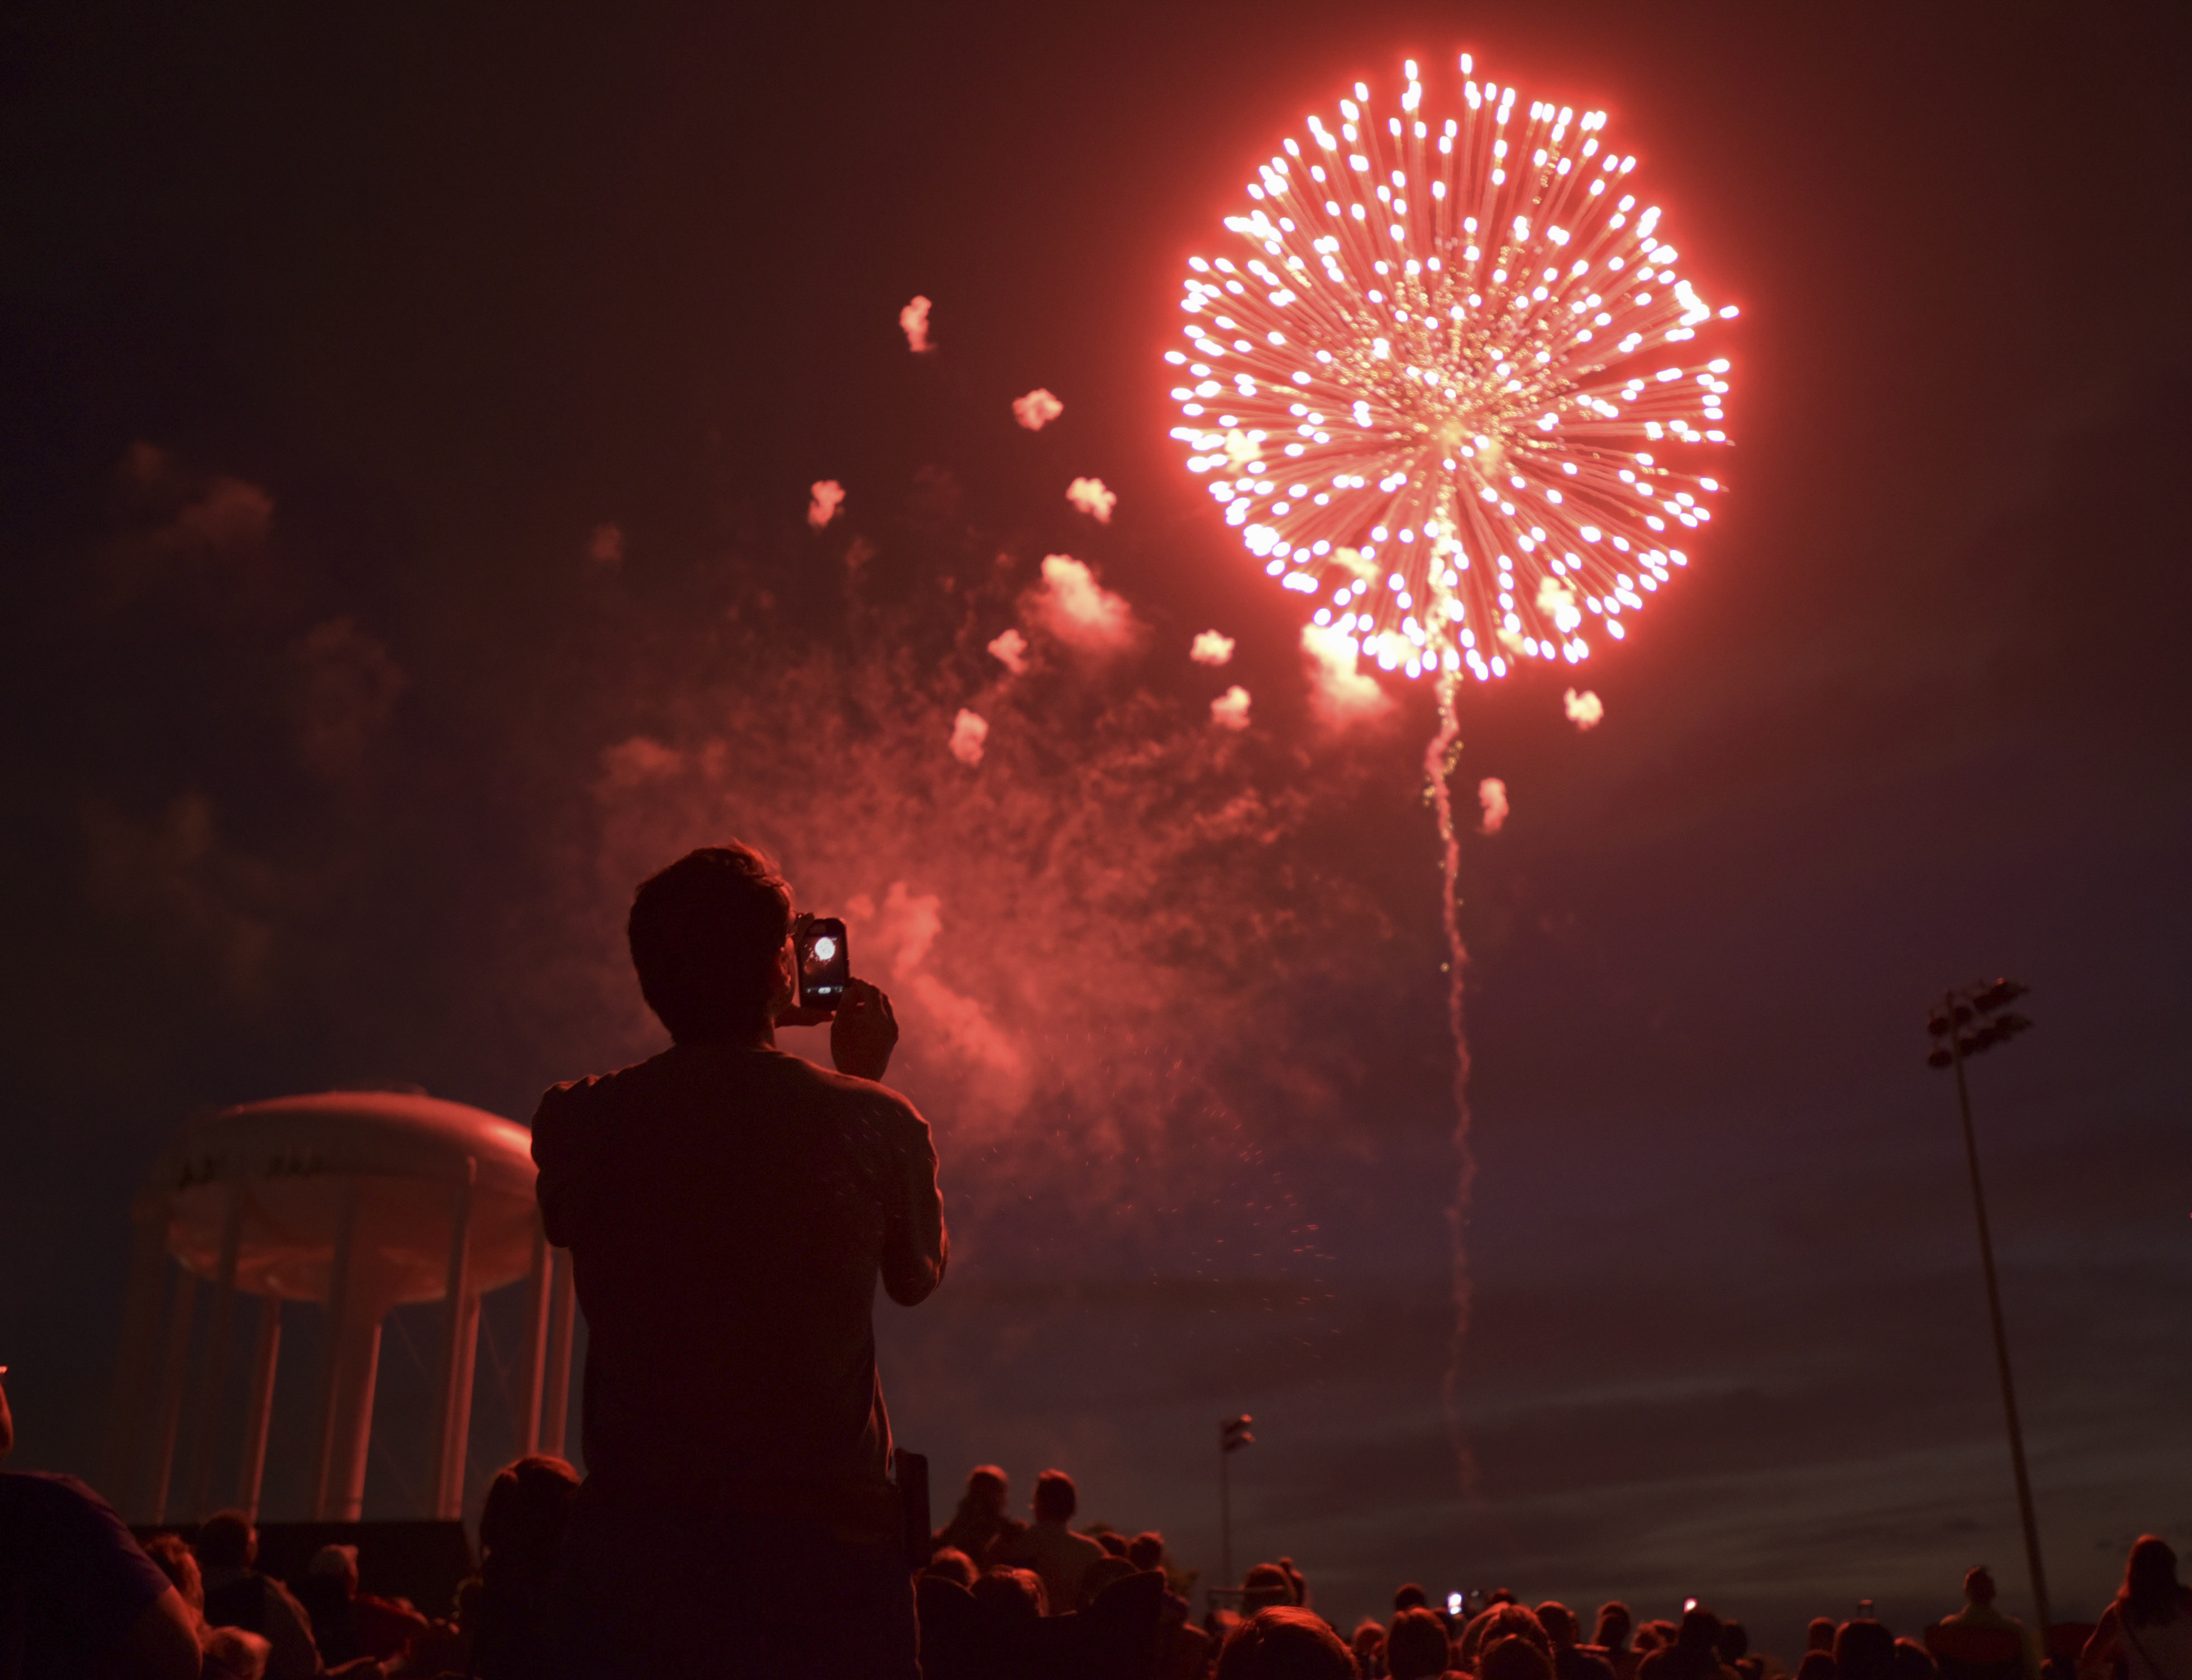 People watch fireworks at Graf Park over Wheaton, Ill., Monday July 3, 2017. (Mark Black/Daily Herald via AP)